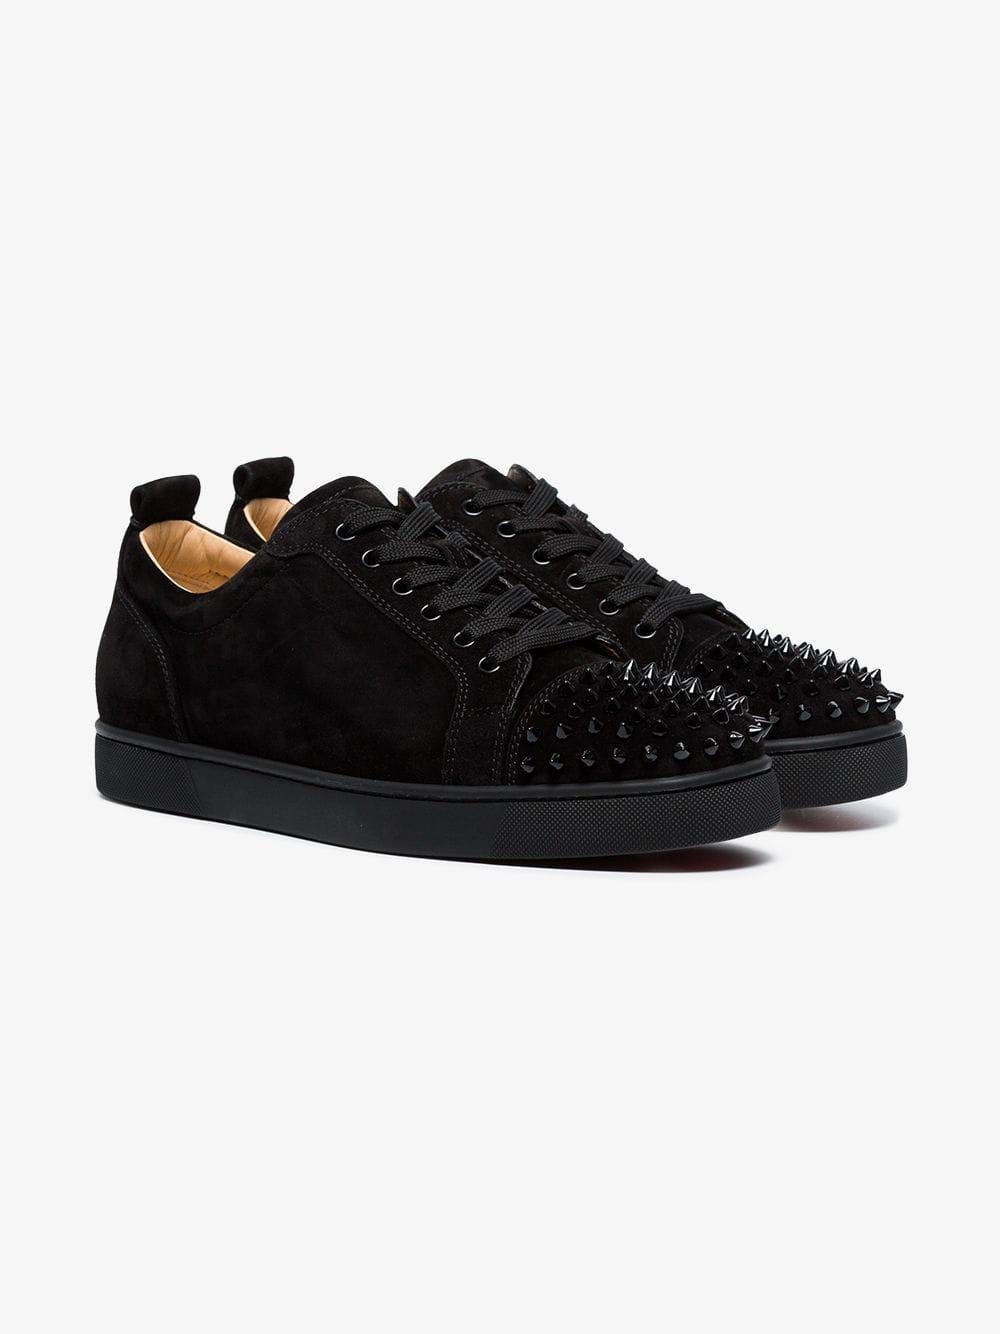 Christian Louboutin Black Leather Louis Junior Spike Sneakers for Men ...